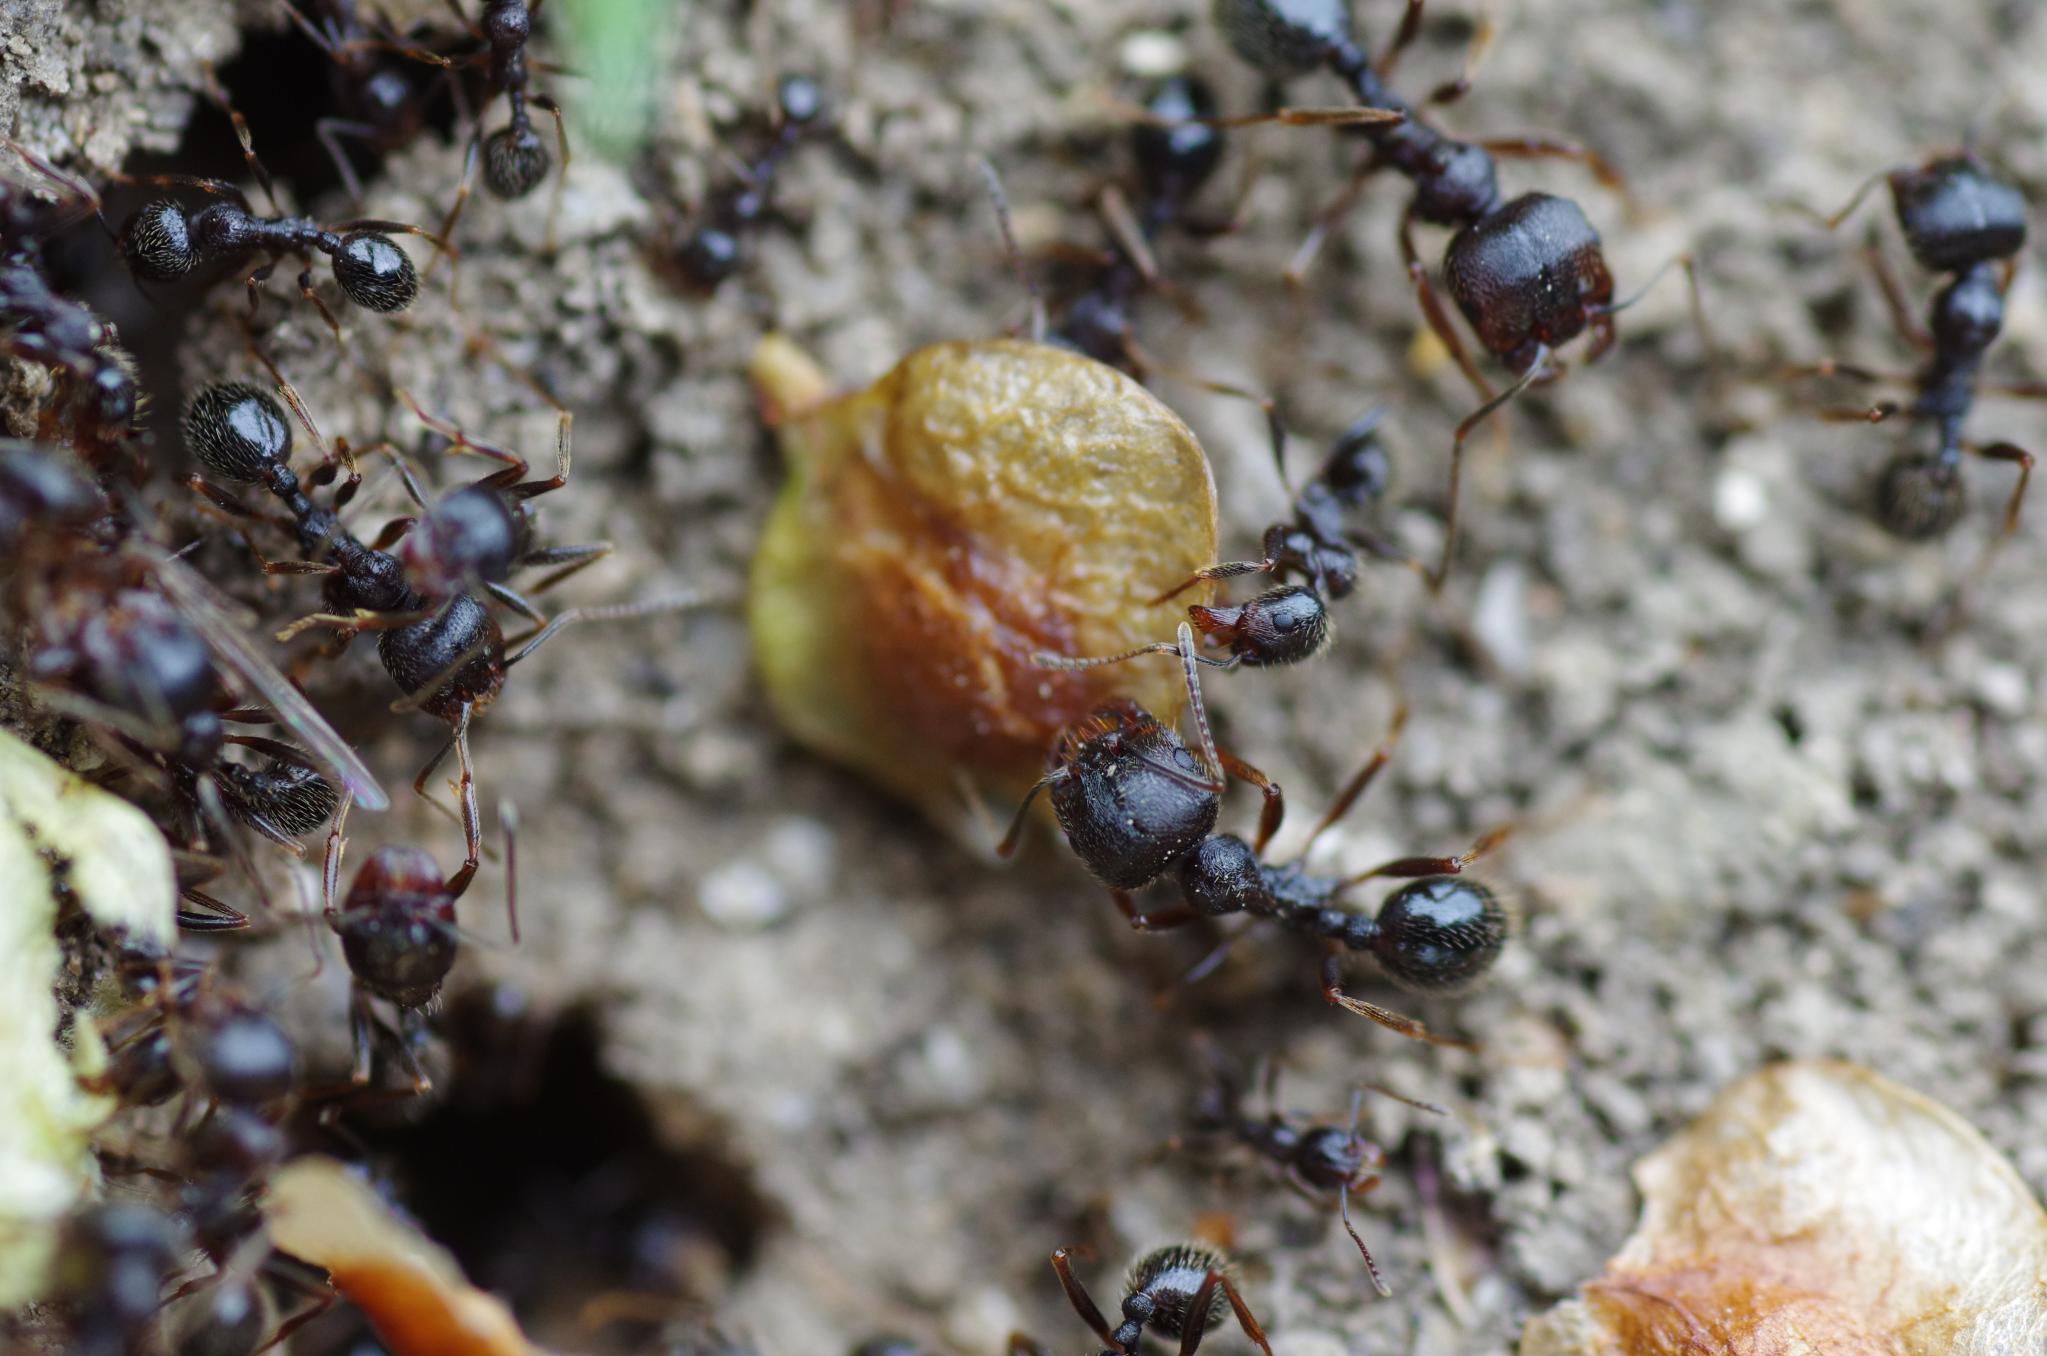 a group of ants walking together in the dirt